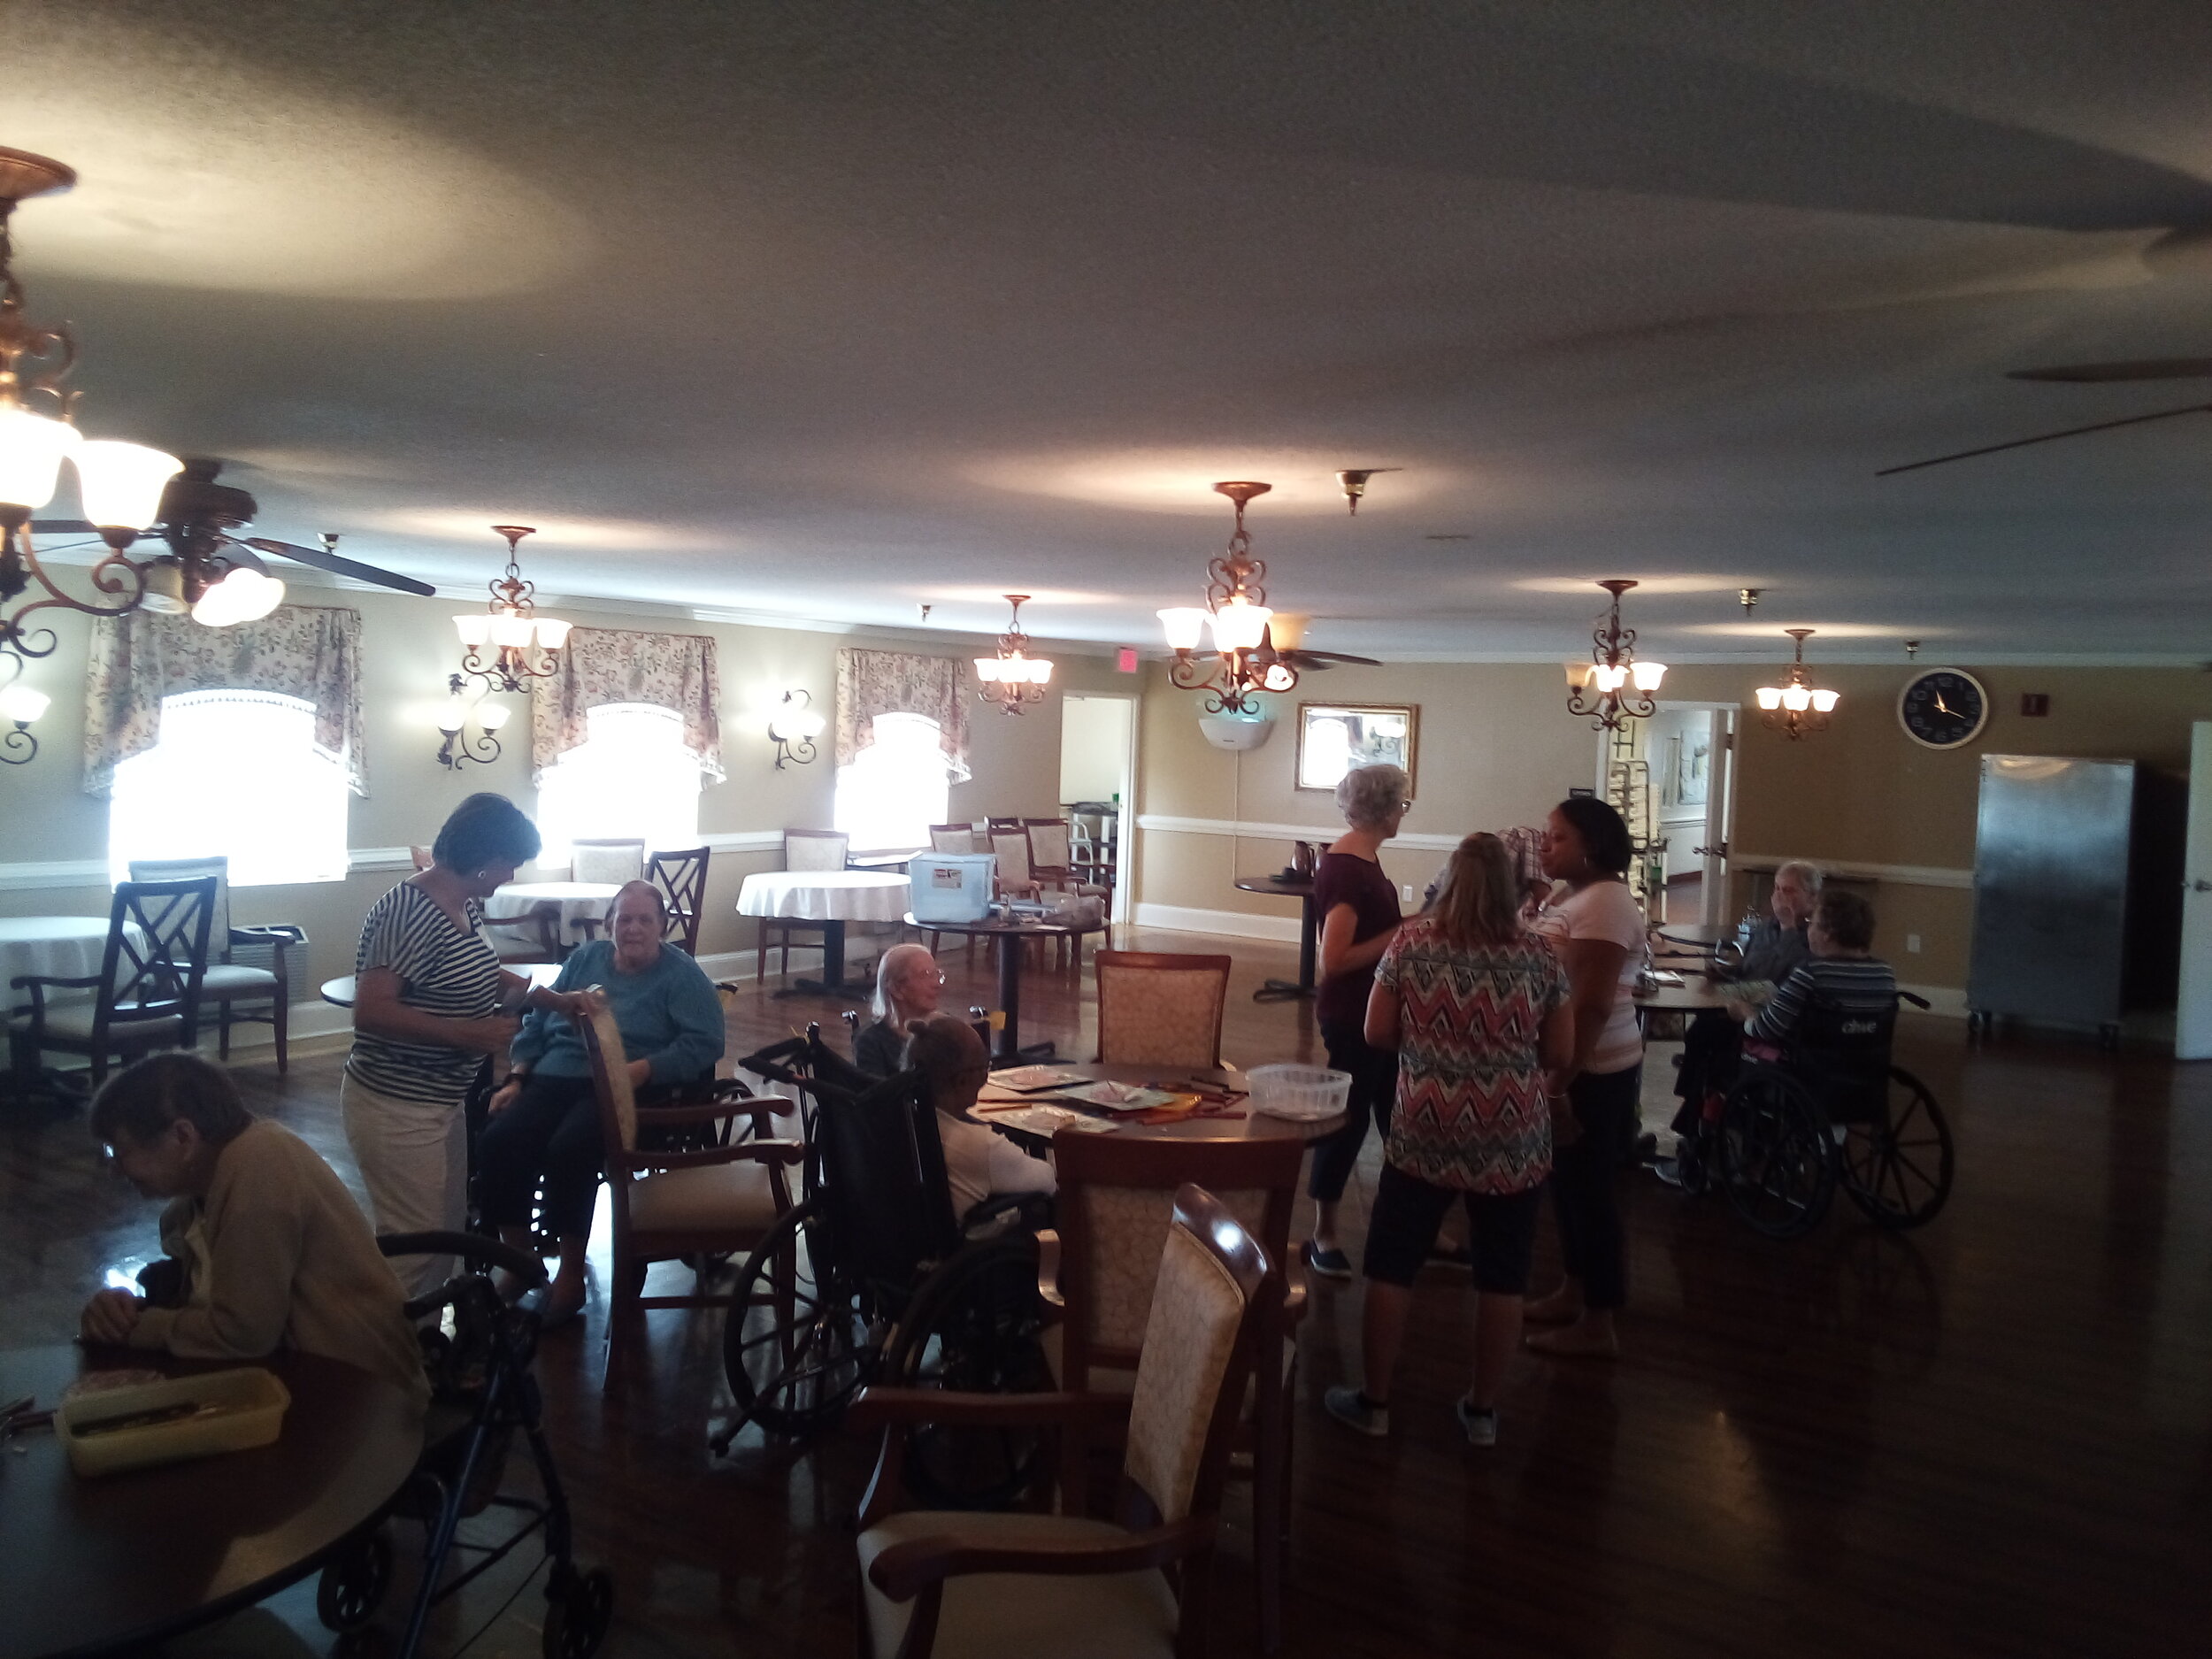 Our volunteers serving the residents at Hillside Nursing home in 2019.